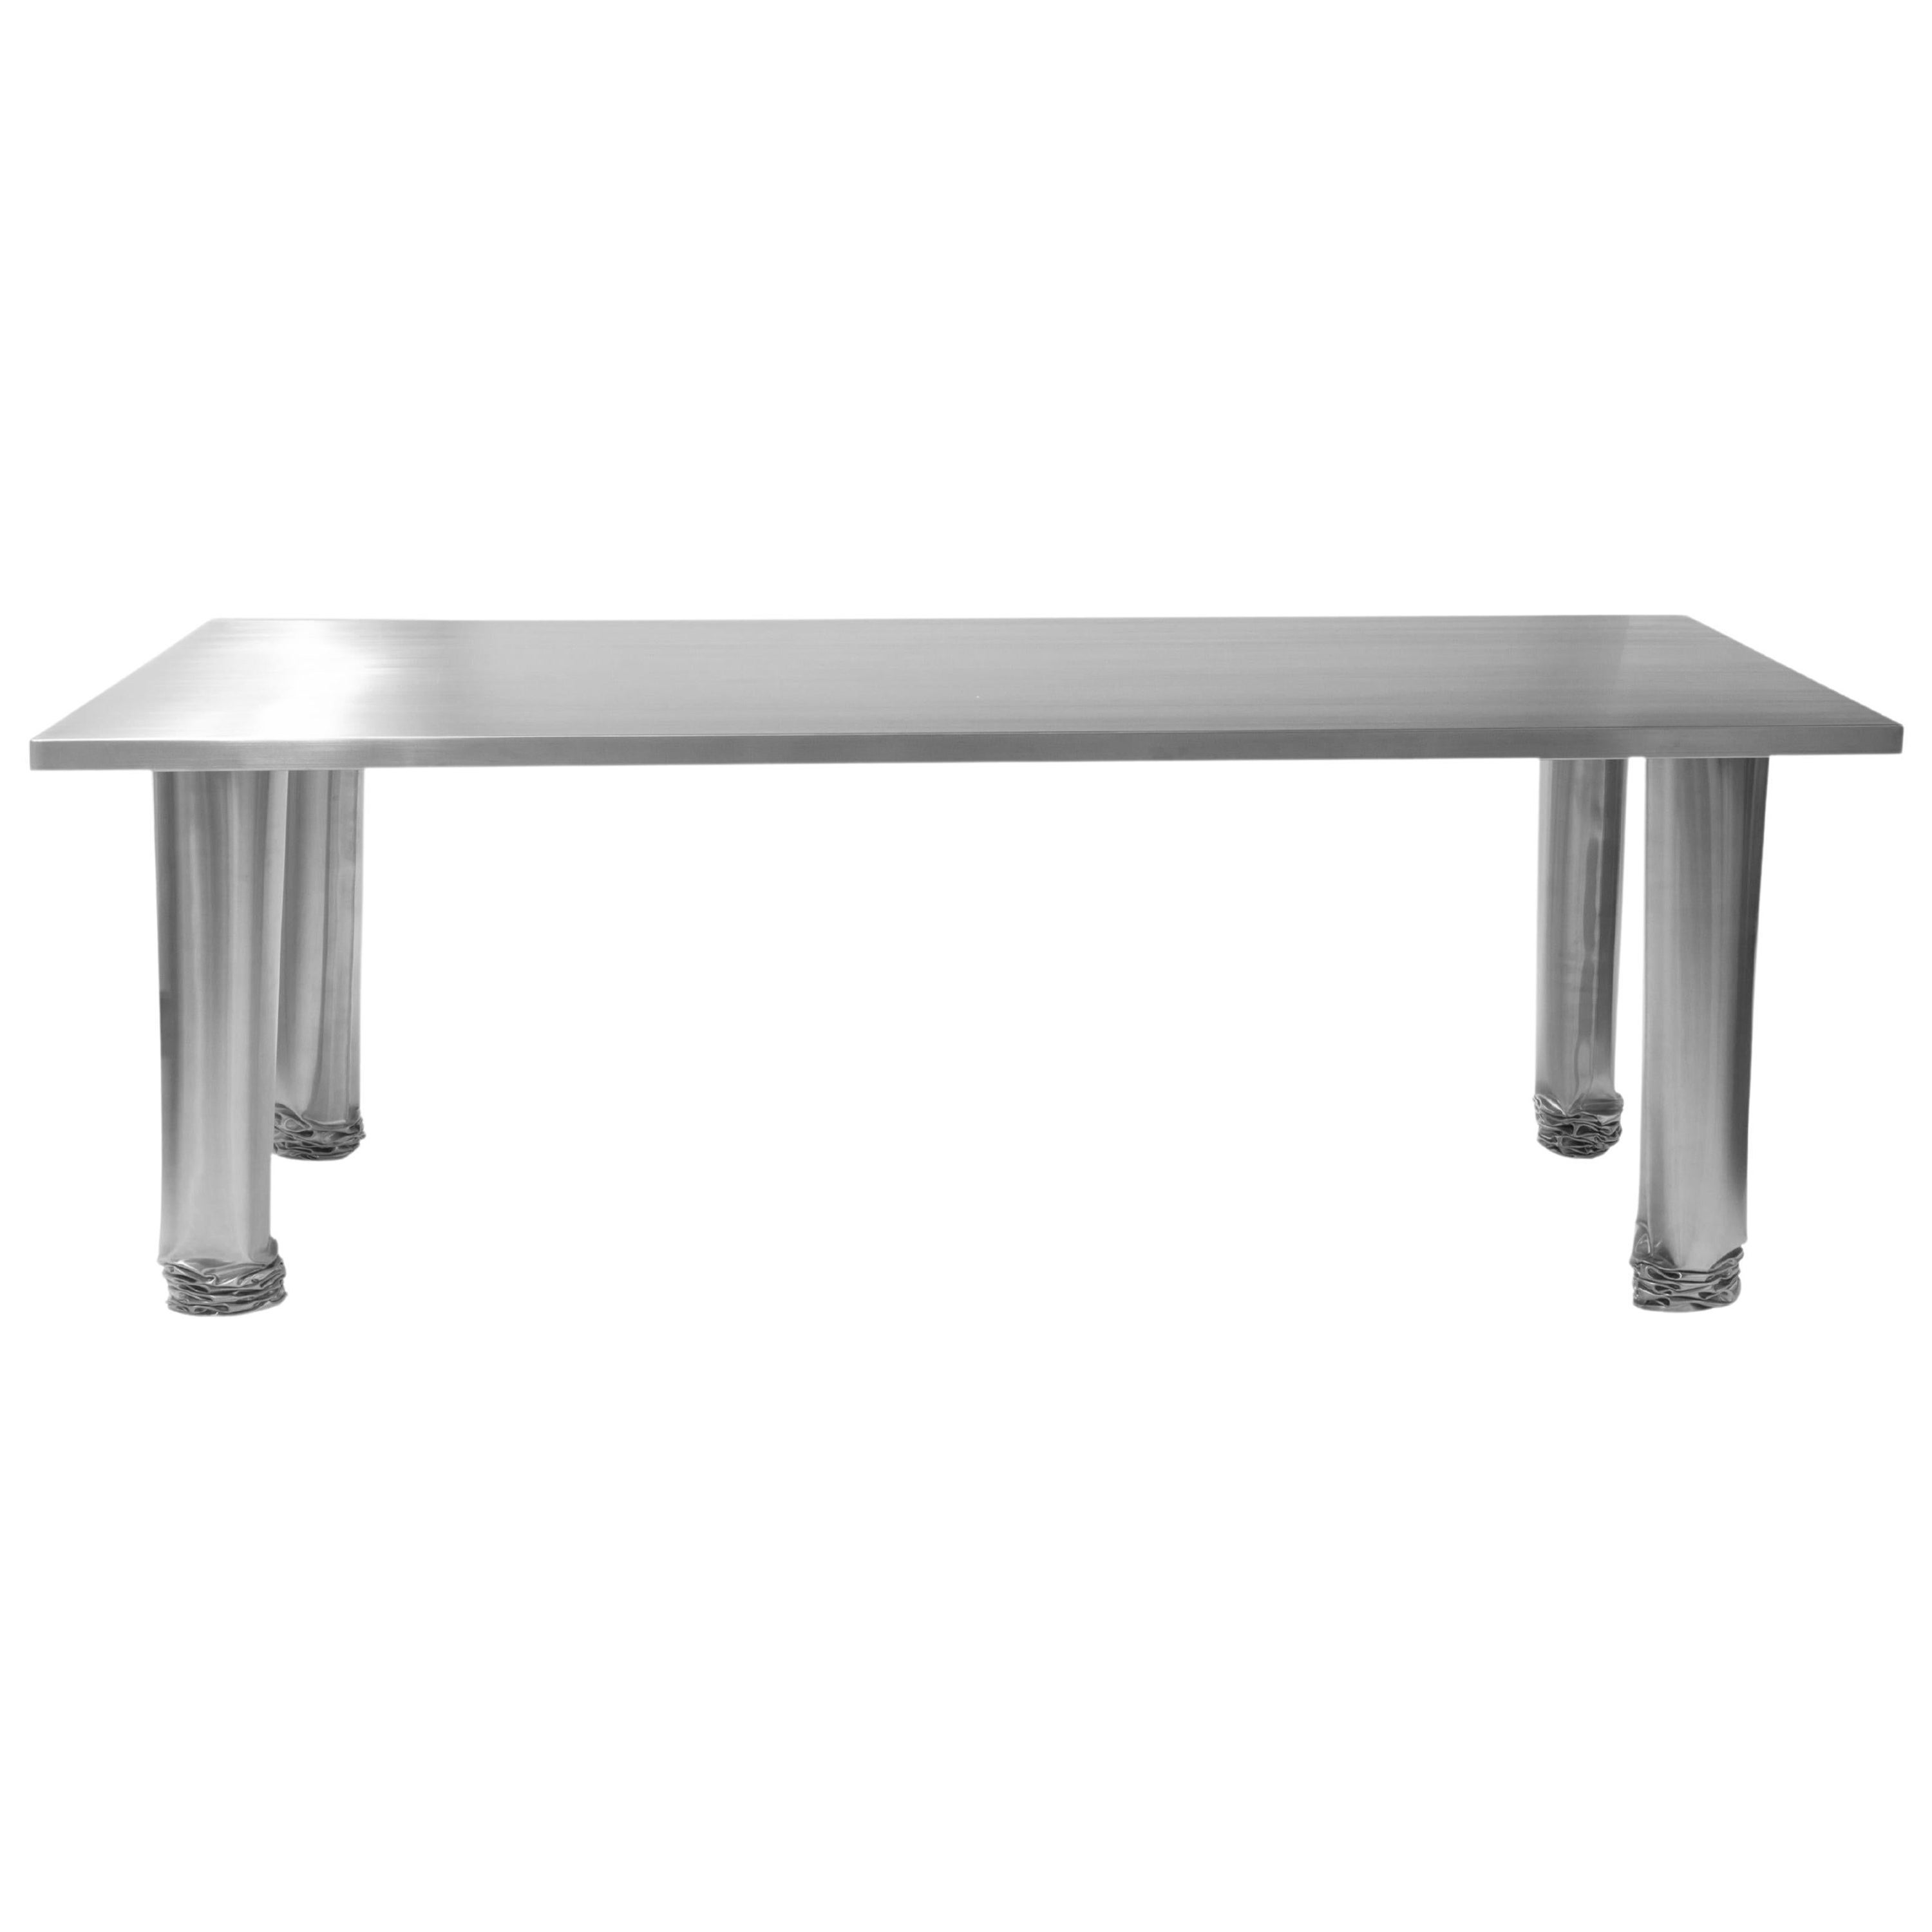 Contemporary Dining Table 'Crash' by Zieta, Stainless Steel